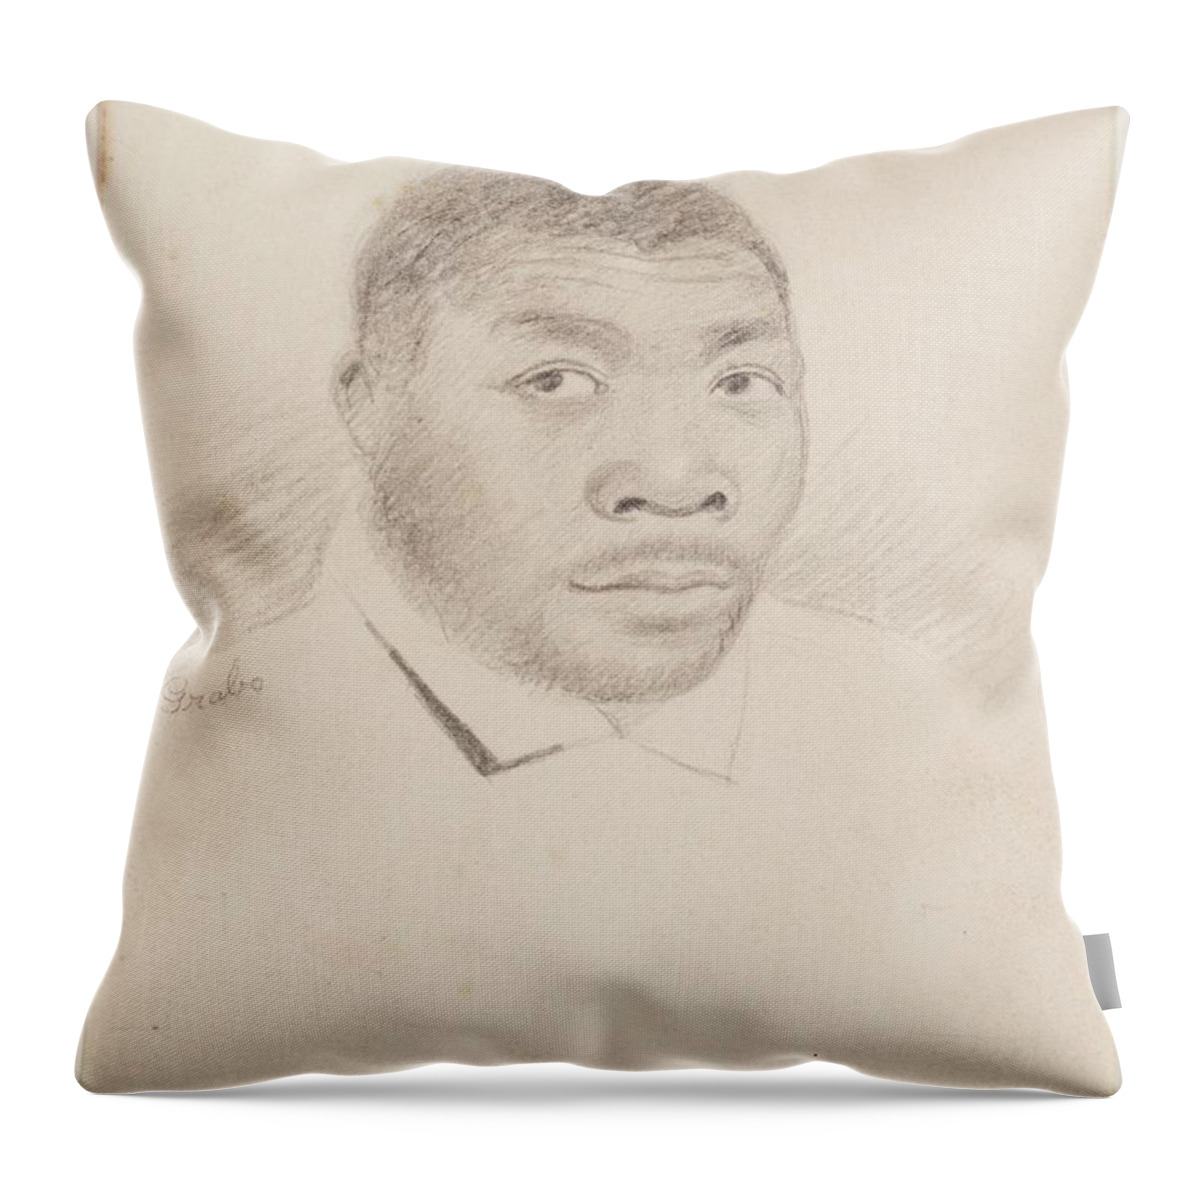 Jail Throw Pillow featuring the painting Amistad Prisoners by Townsend William H 1822 1851 13 by Celestial Images